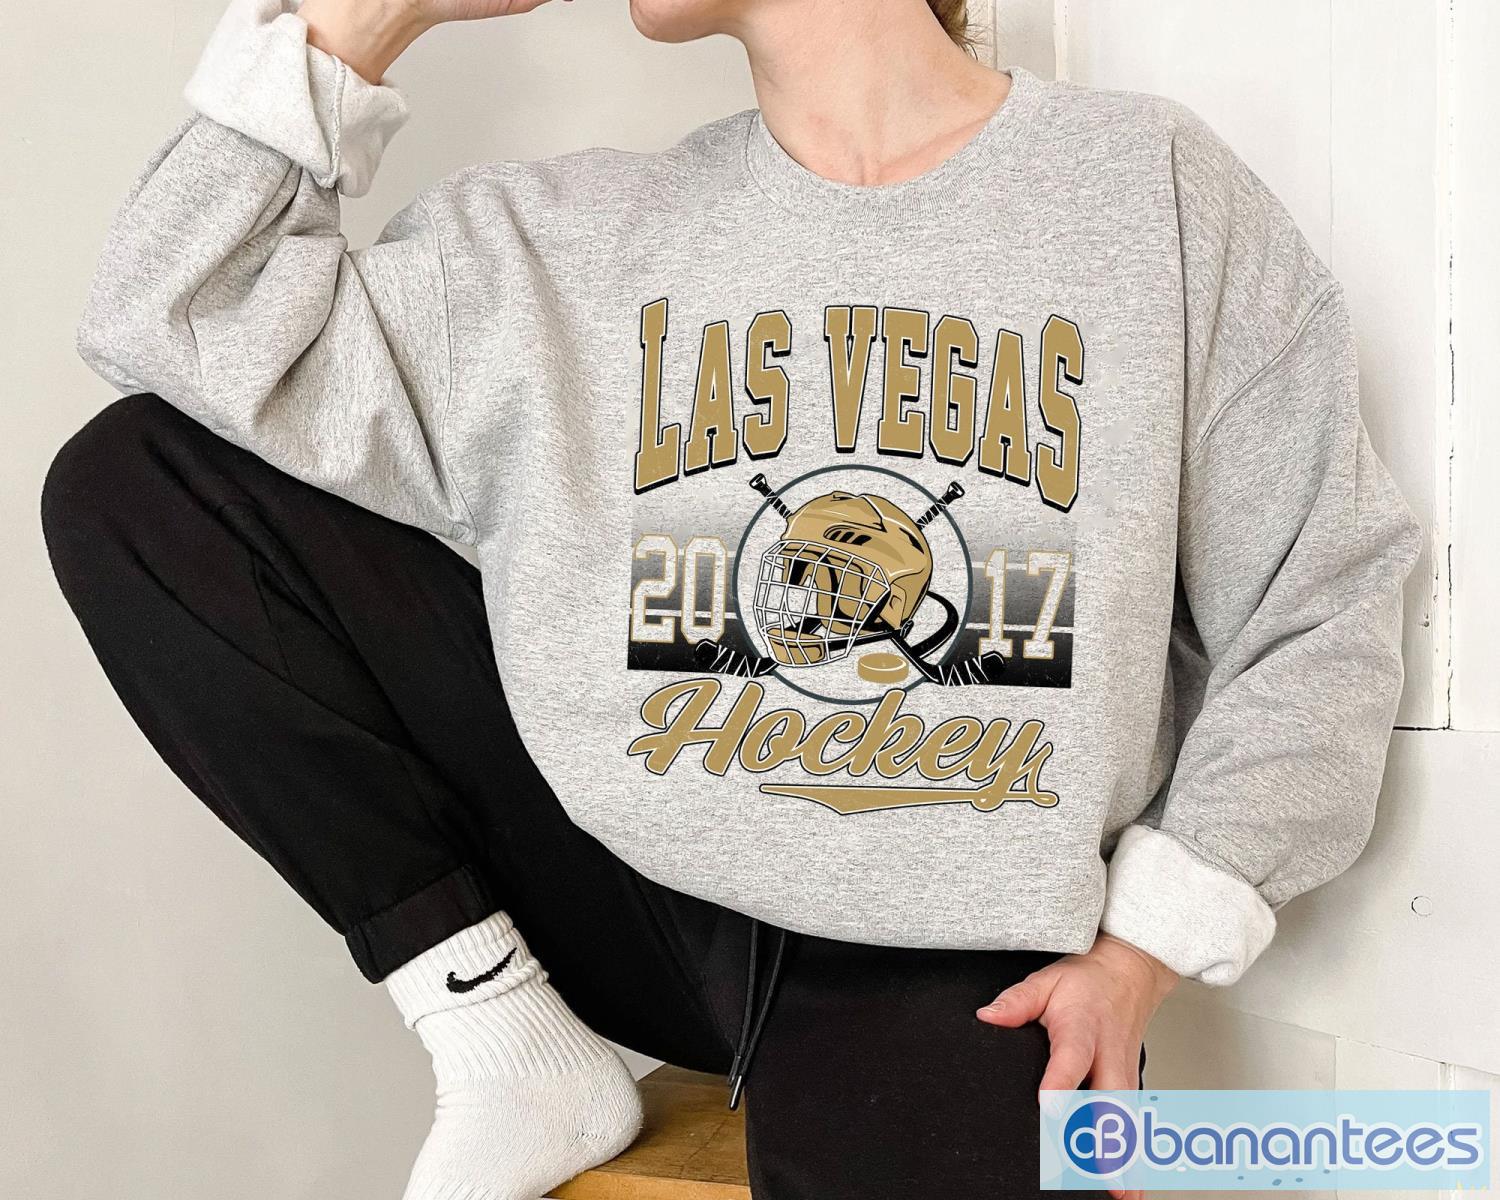 Official awesome nashville predators hockey shirt, hoodie, sweater, long  sleeve and tank top